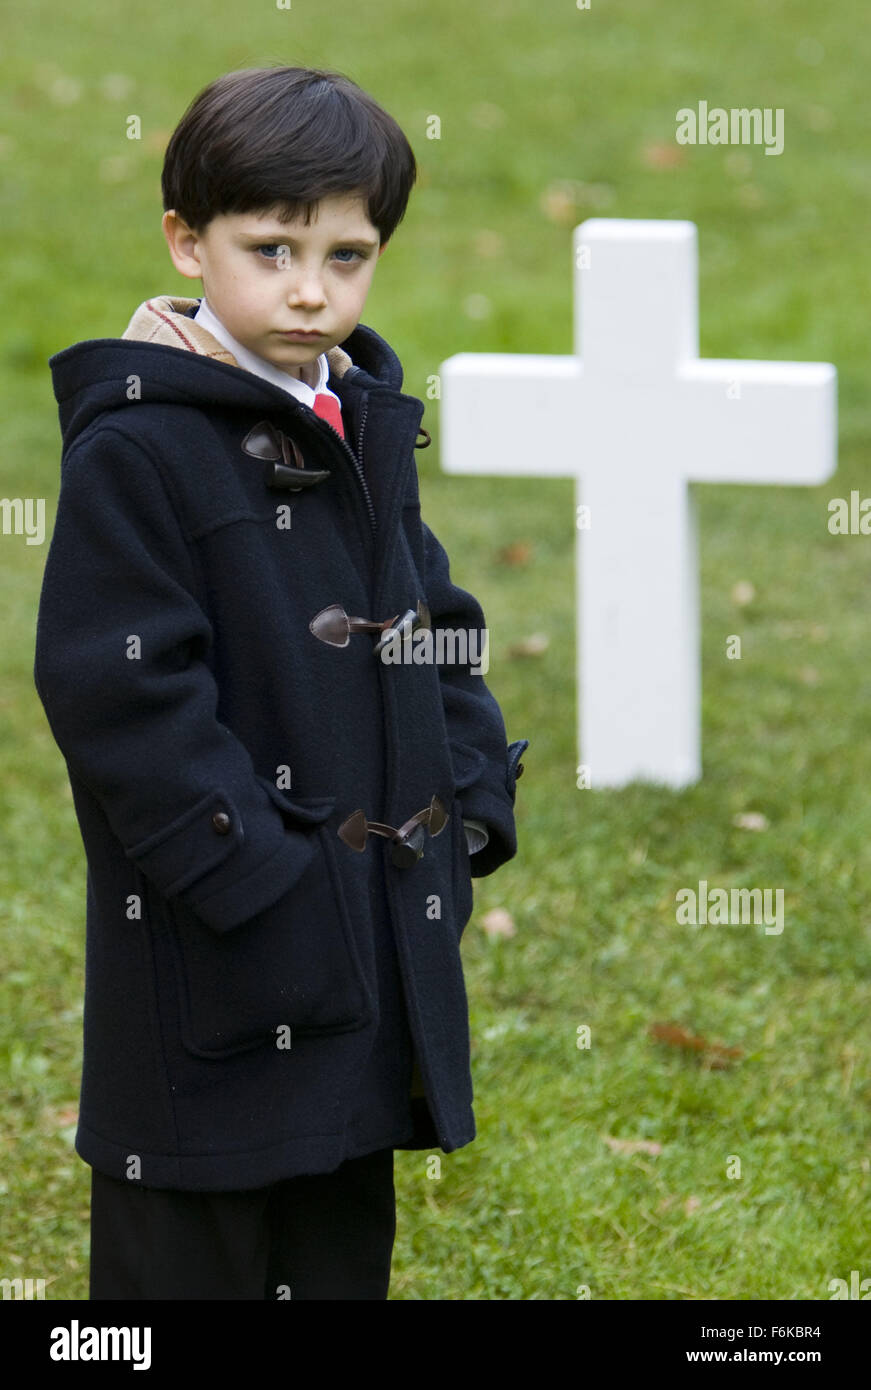 RELEASE DATE: June 6, 2006. MOVIE TITLE: The Omen. STUDIO: 20th Century Fox. PLOT: A remake of the 1976 horror classic The Omen (1976), an American official realizes that his young son may literally be the devil incarnate. PICTURED: SEAMUS DAVEY-FITZPATRICK stars as Damien. Stock Photo